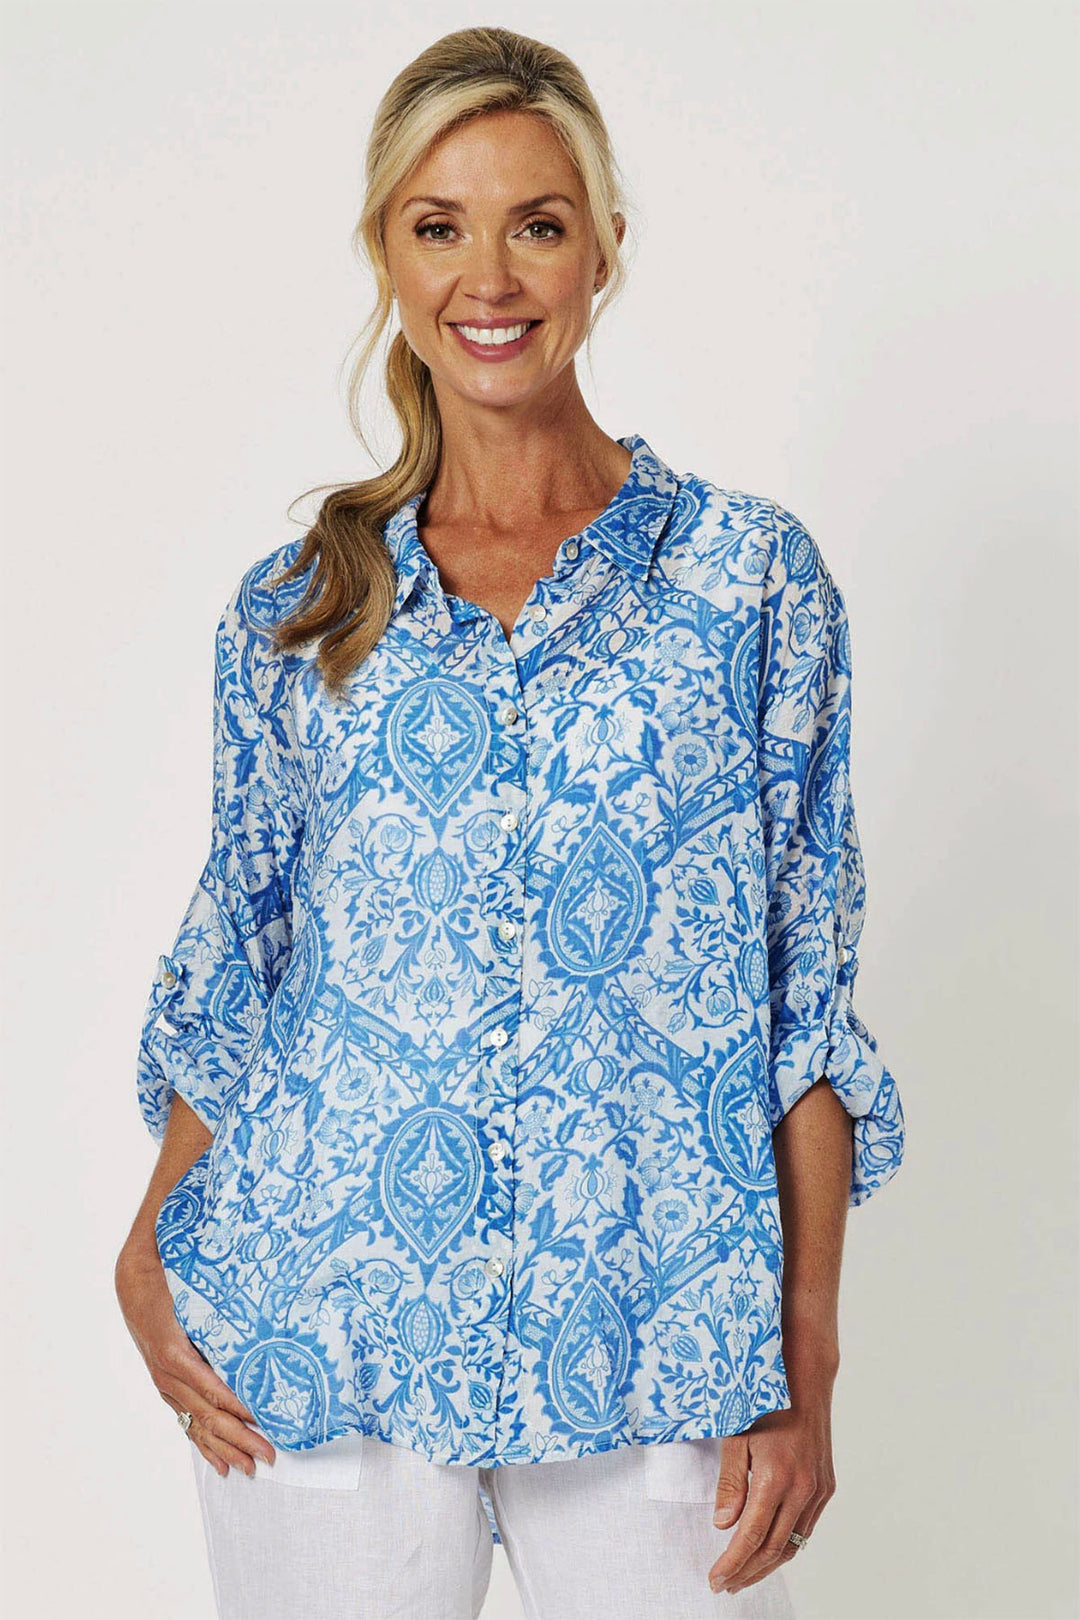 woman wearing a Gordon Smith blue and white resort shirt from Pizazz Boutique